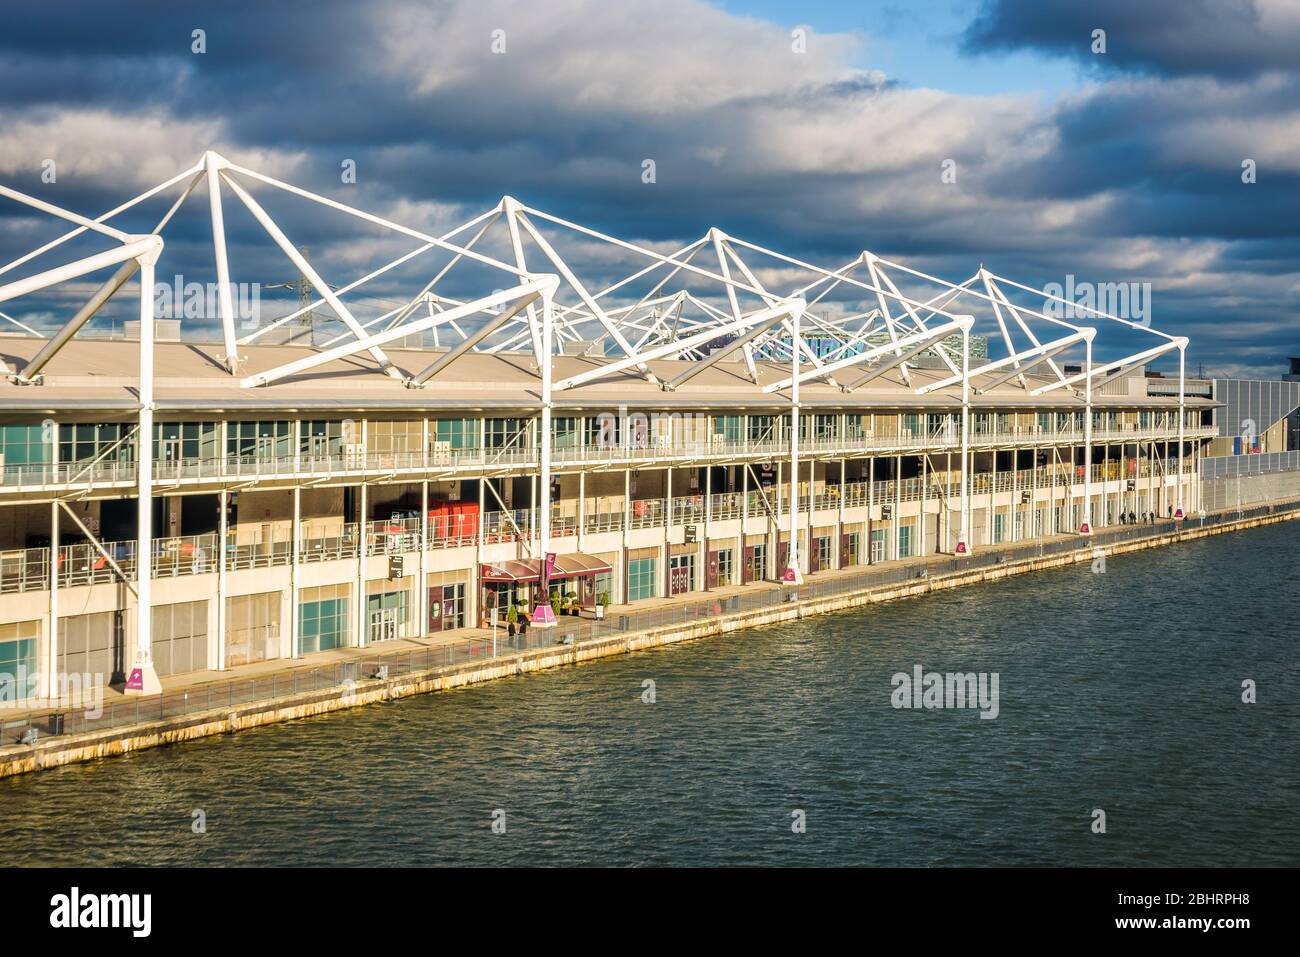 The ExCeL Centre, an exhibitions and international convention centre situated near Royal Victoria Dock, London Docklands, England. Stock Photo